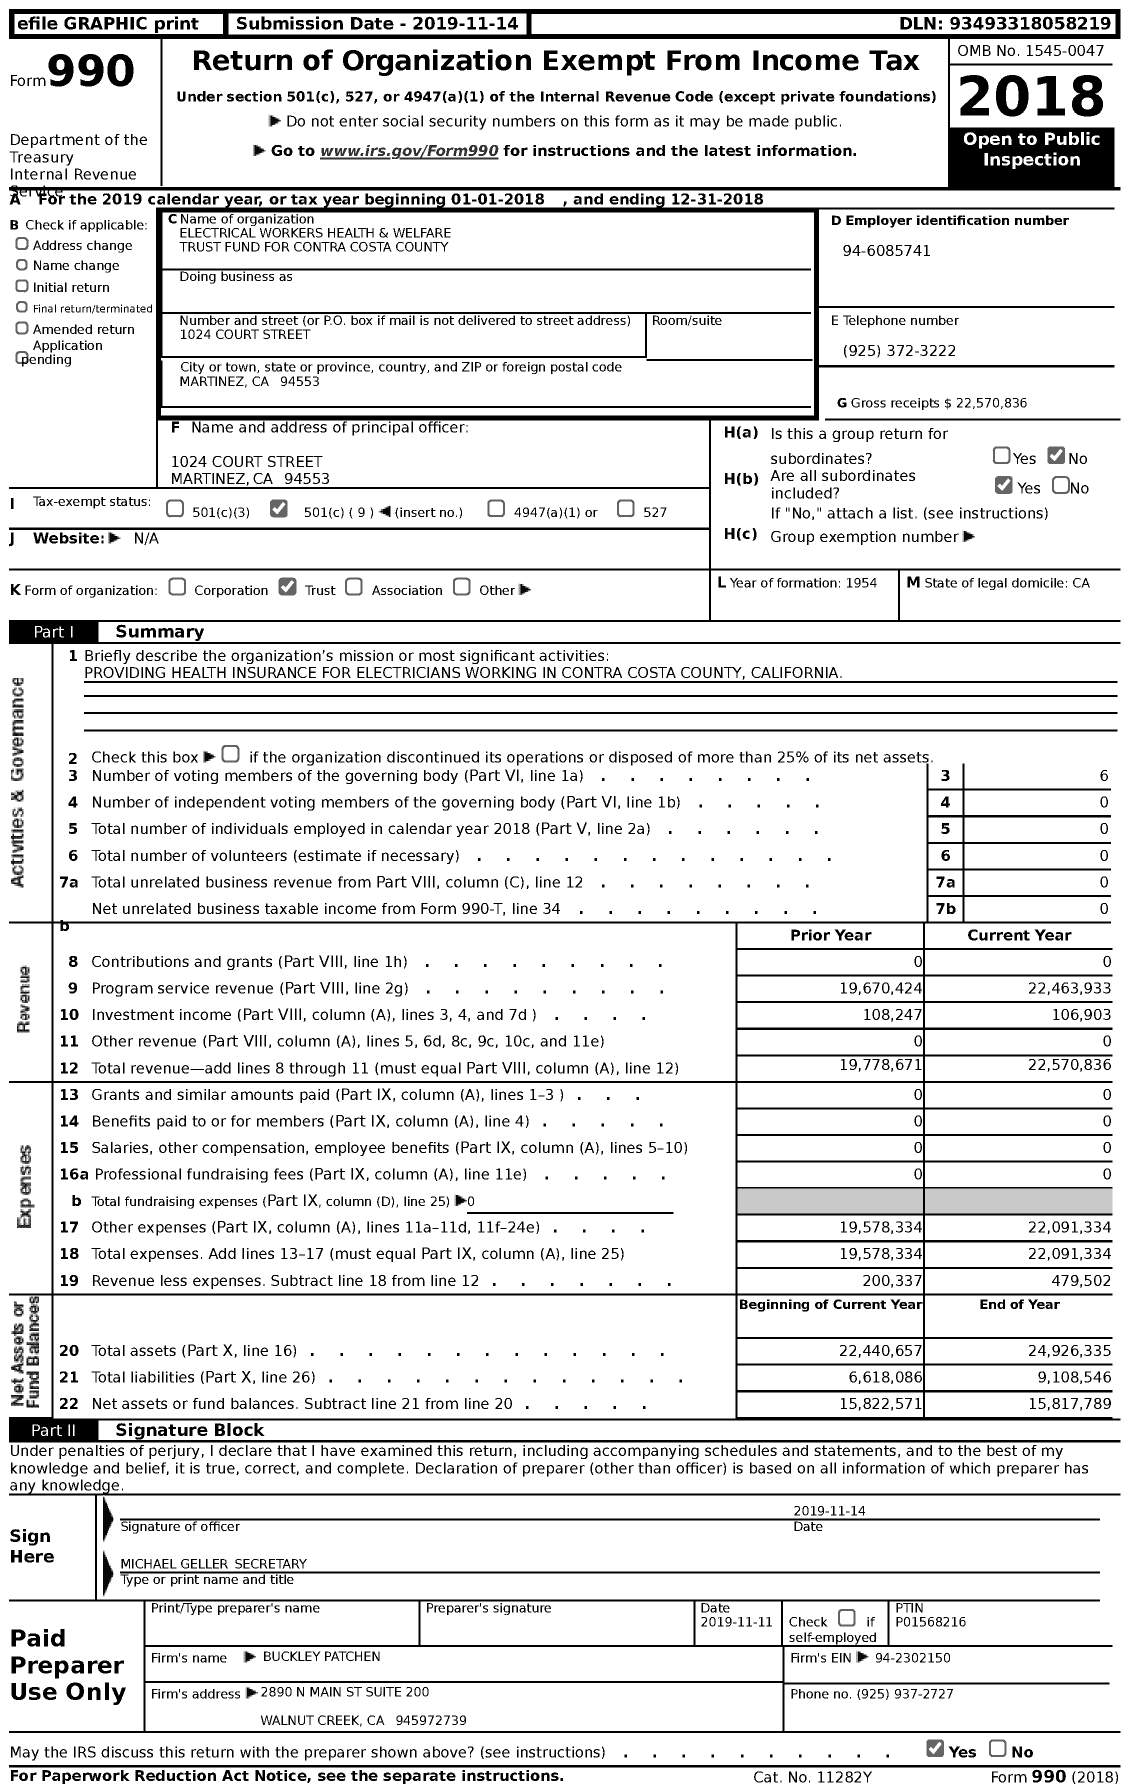 Image of first page of 2018 Form 990 for Electrical Workers Health and Welfare Trust Fund for Contra Costa County